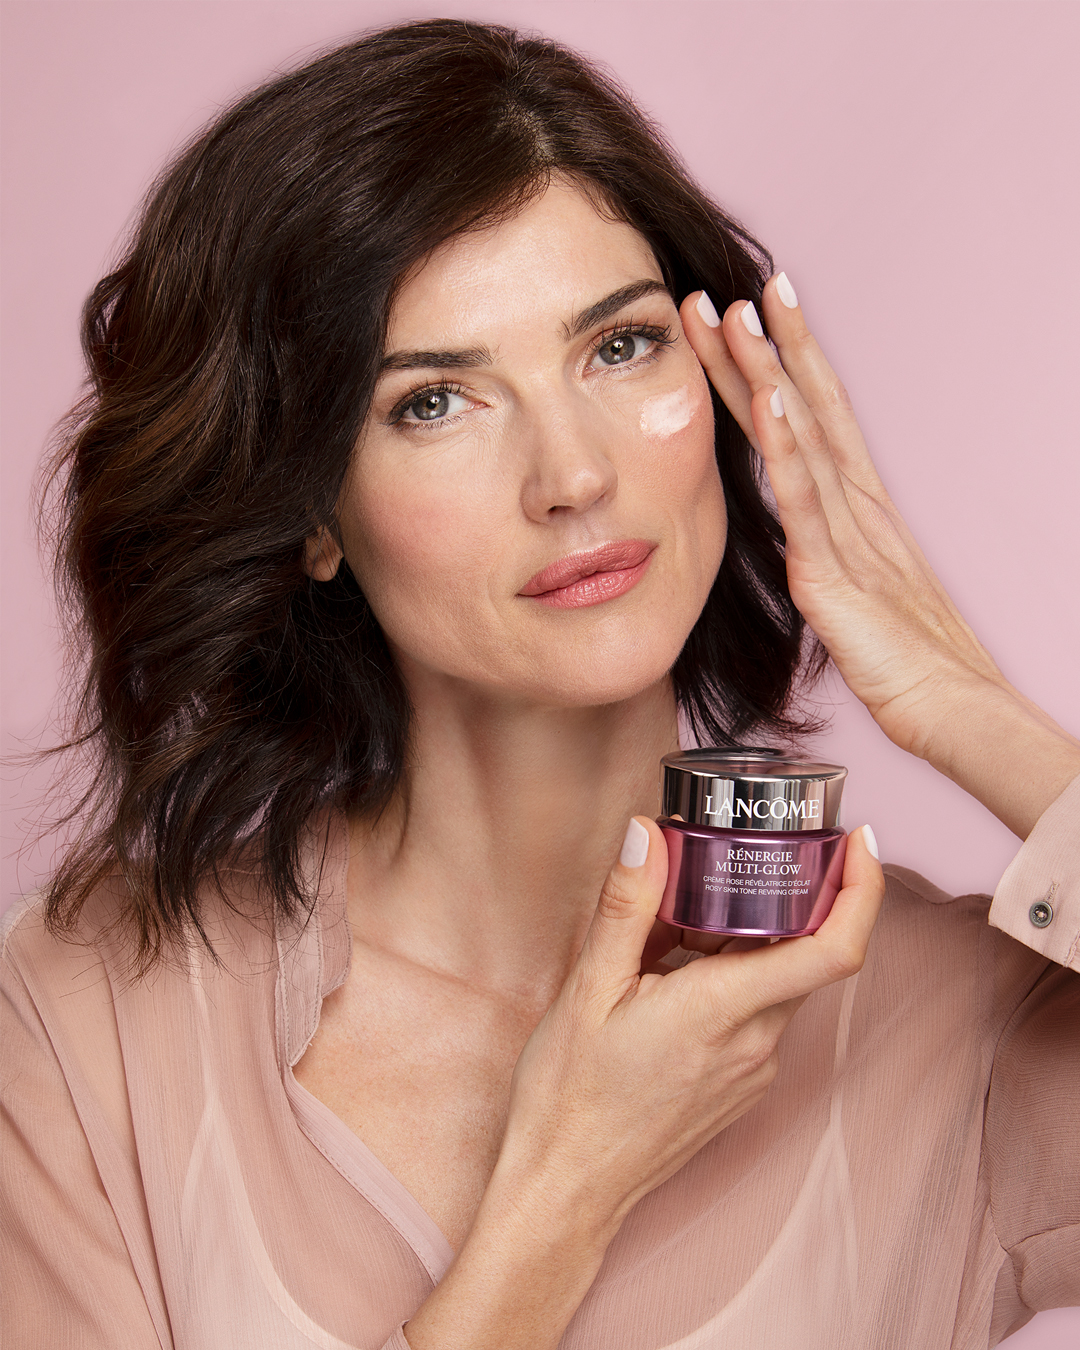 Lancome In Use.jpg